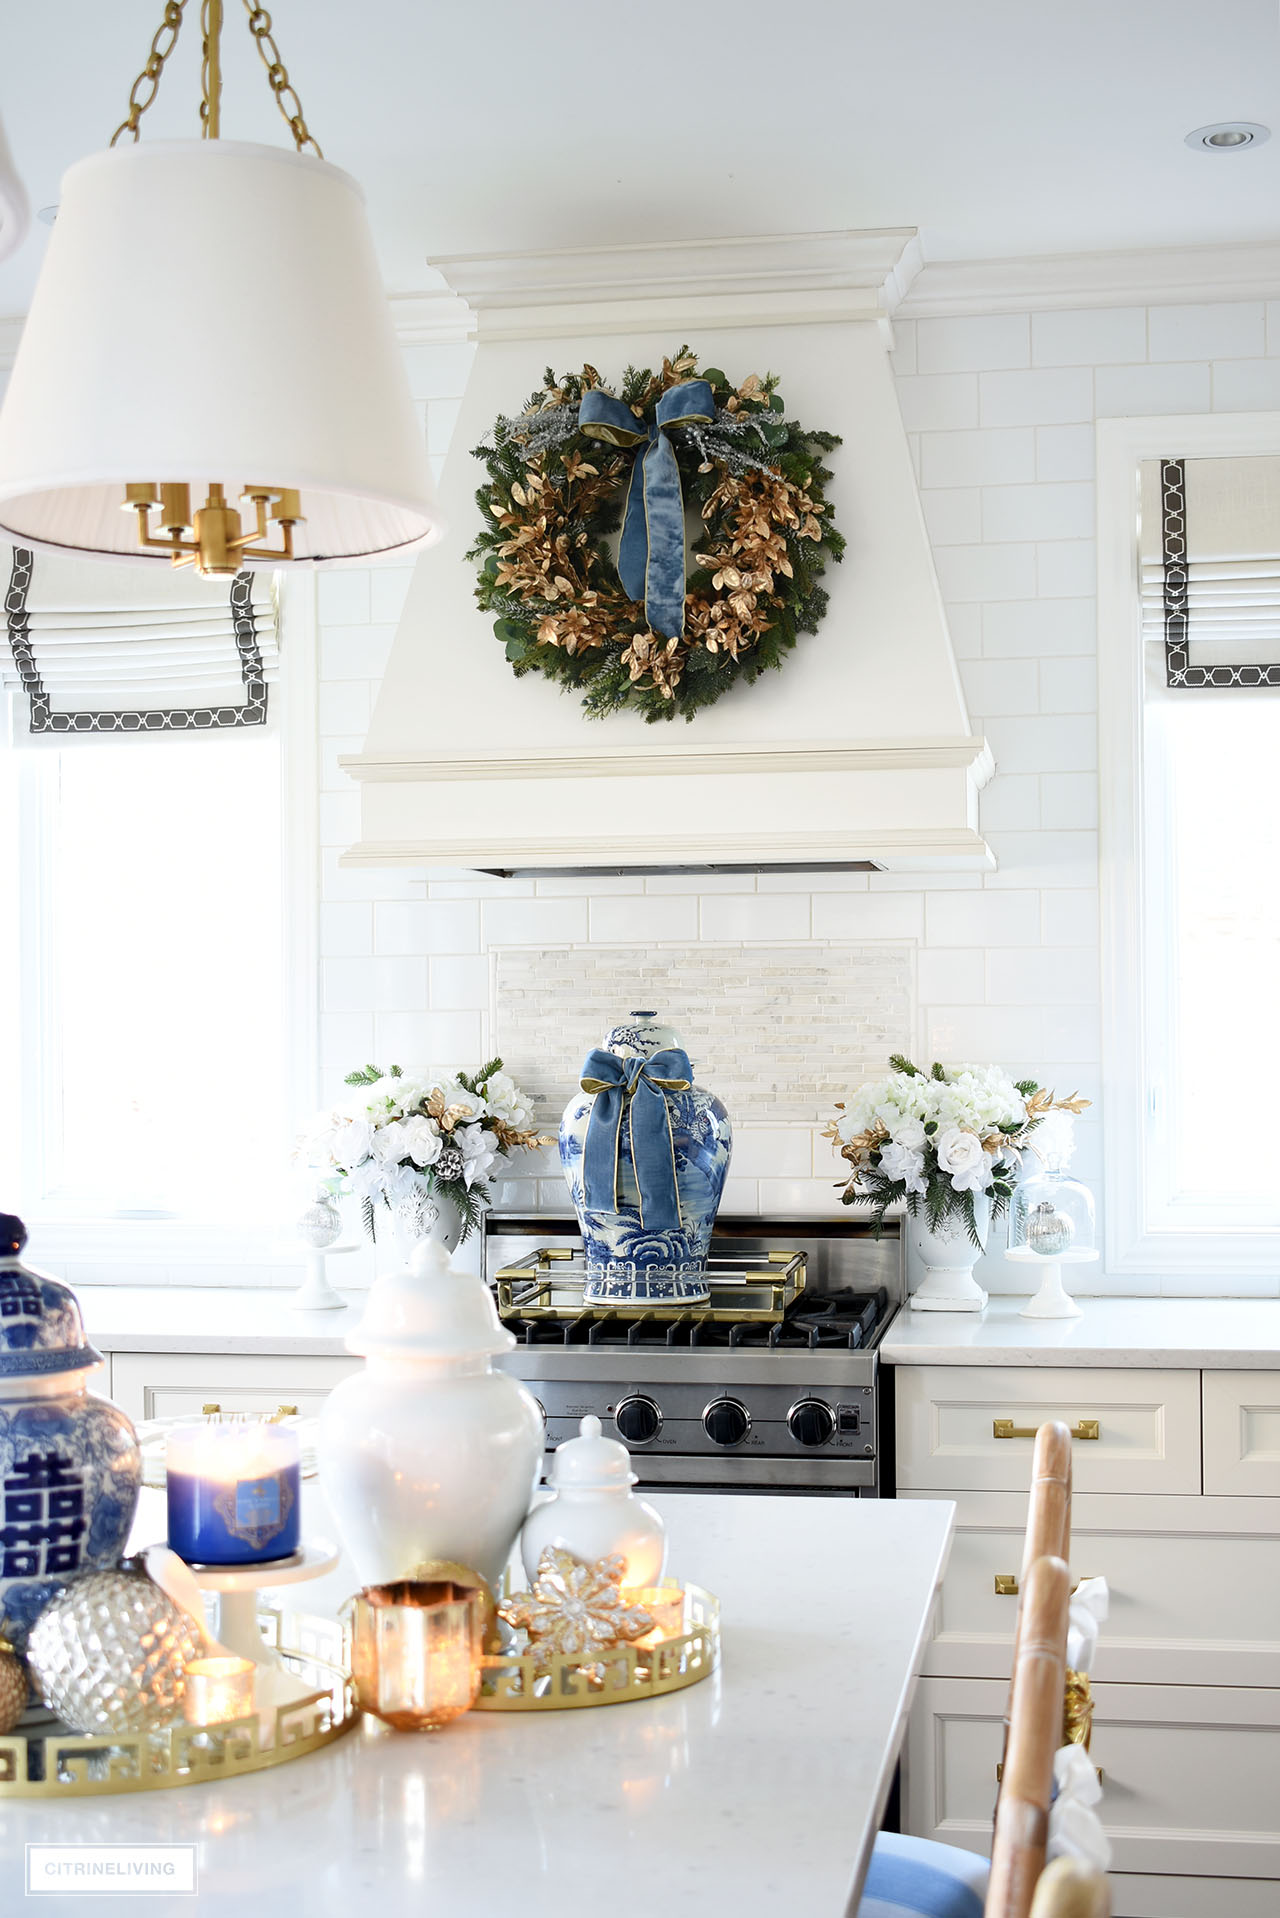 Kitchen range decorated for Christmas with a large blue and white ginger jar tied with blue velvet ribbon, flanked with white, green and gold floral arrangements.